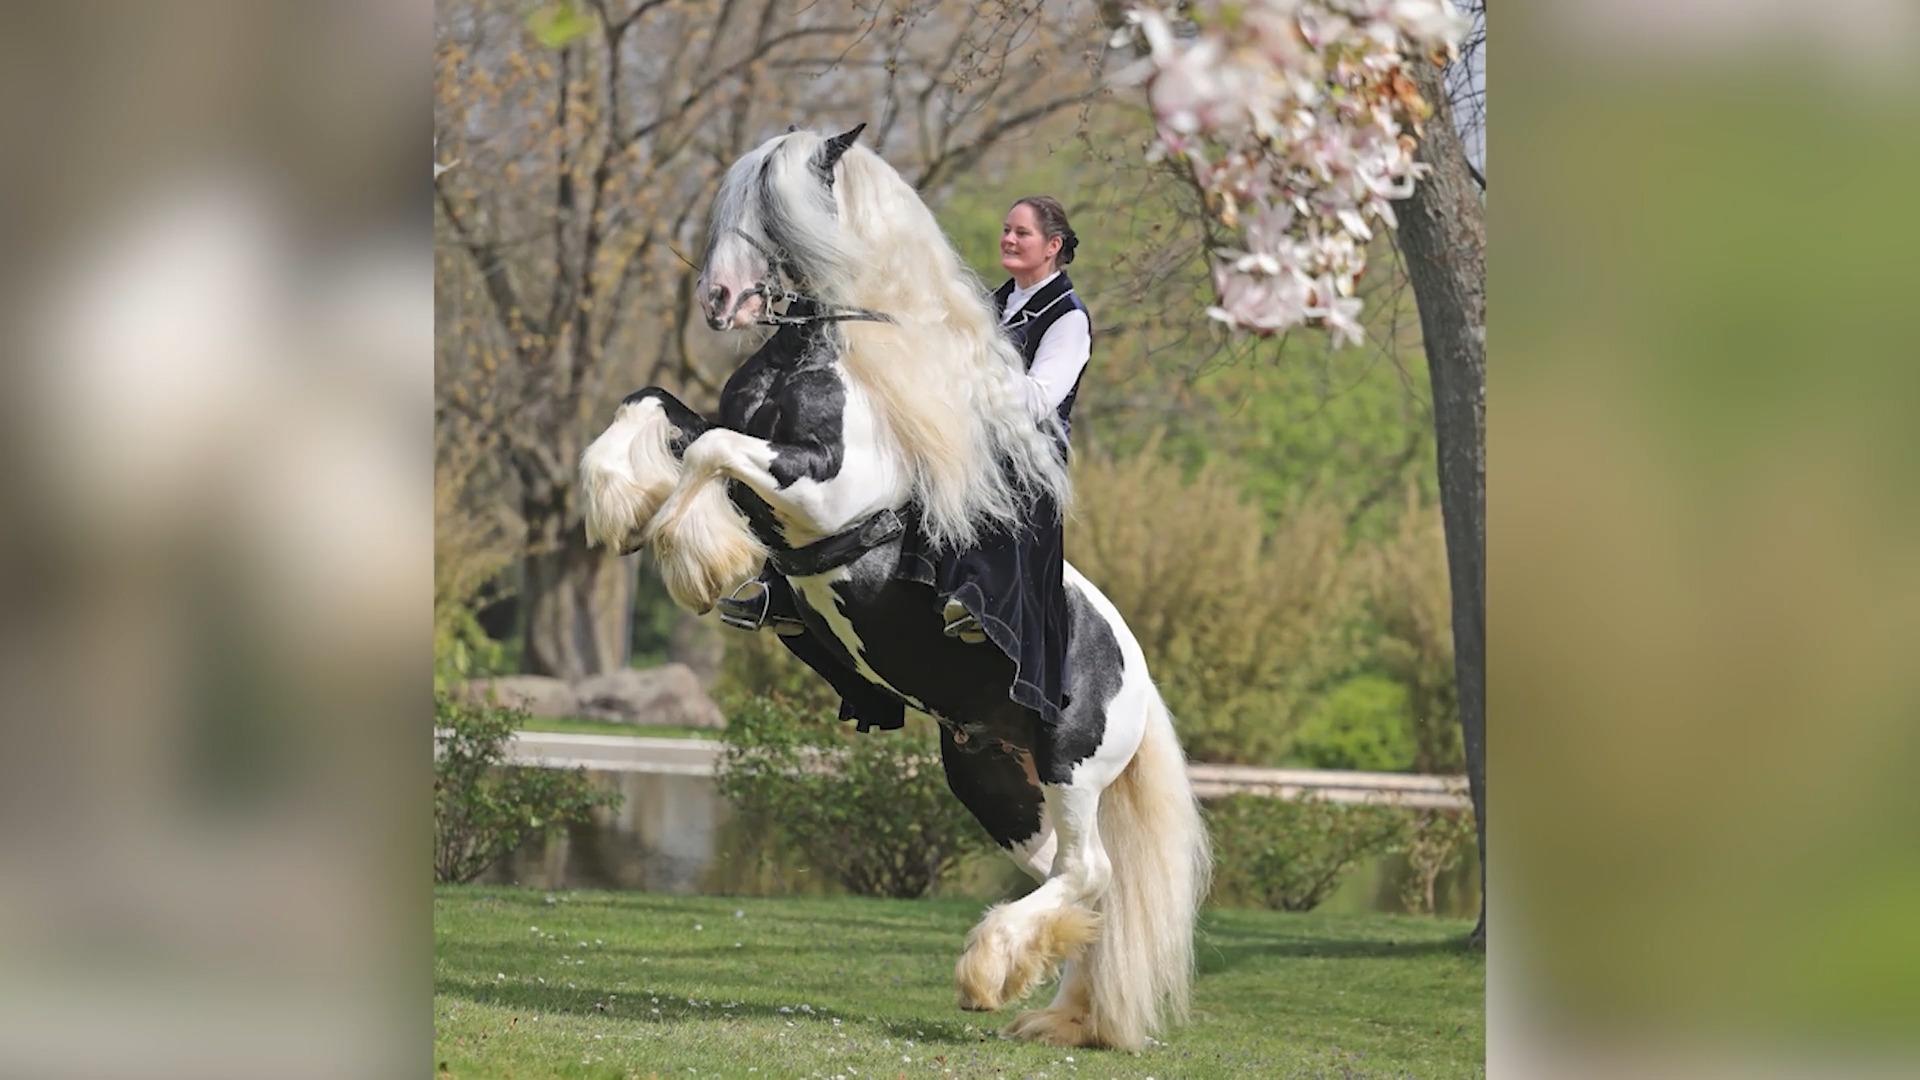 Tinker Stallion Raven Cloud has the most beautiful curly maned Rapunzel of horses